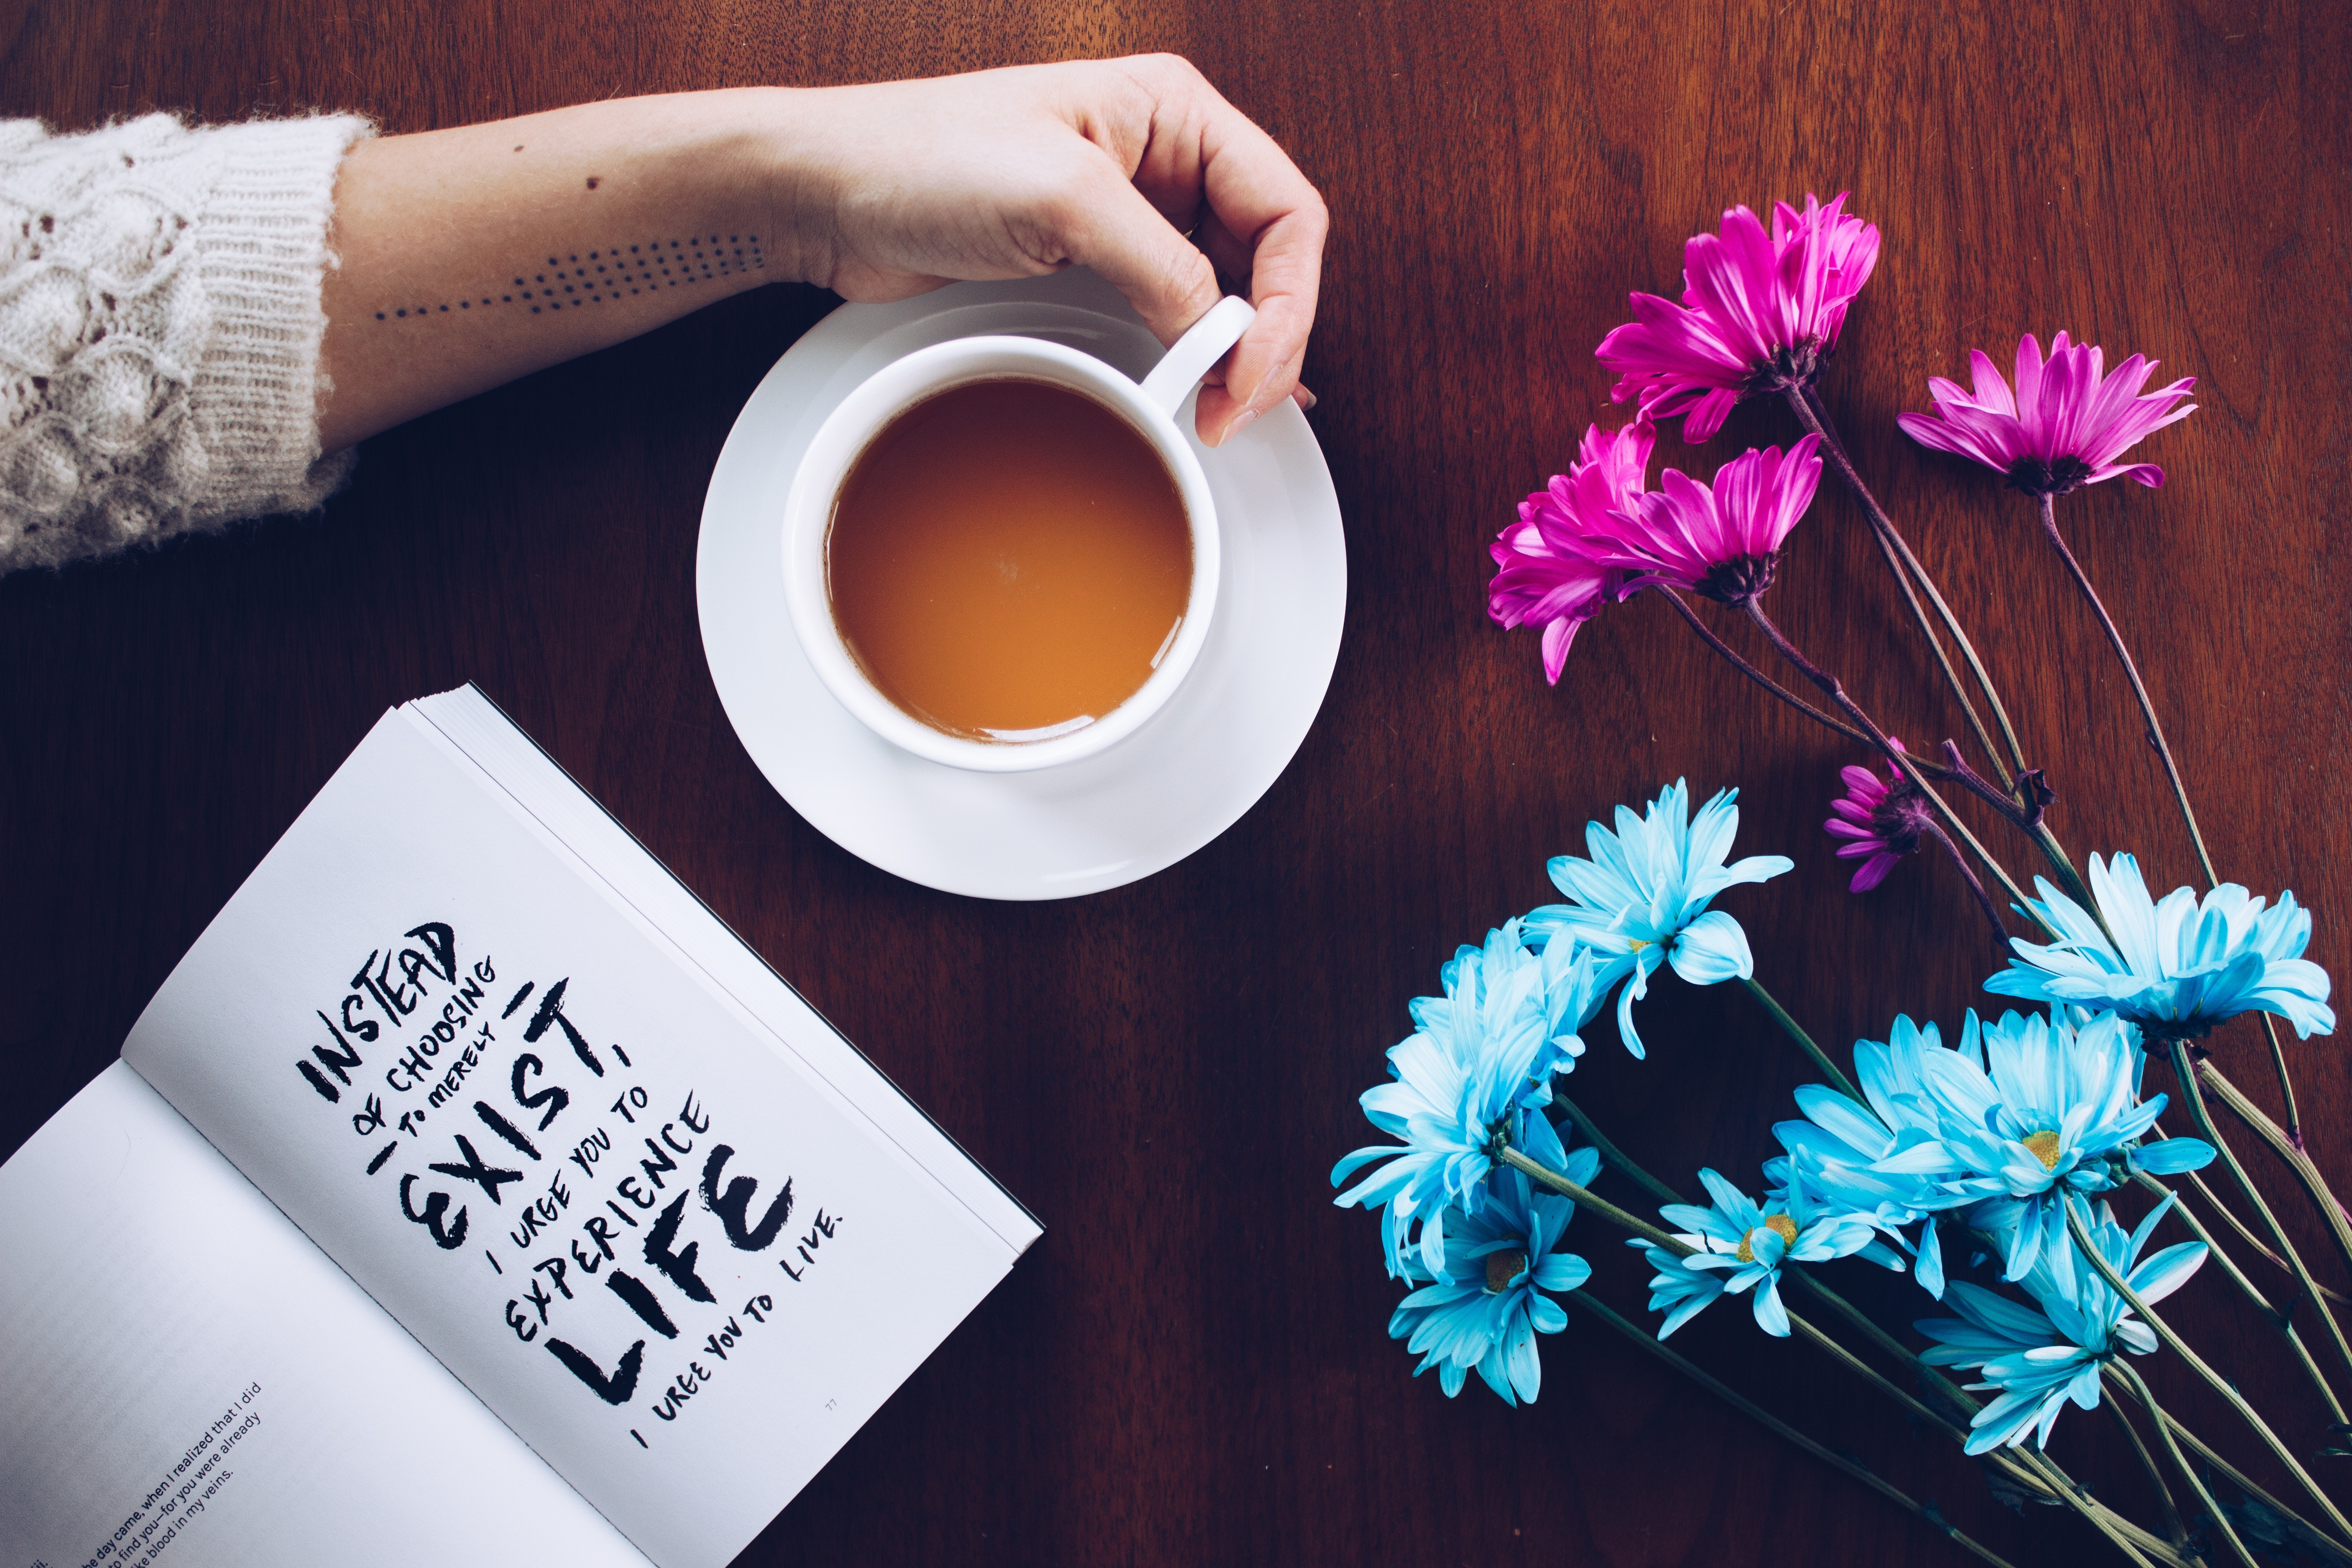 Picture of a cup of team a book and some flowers.